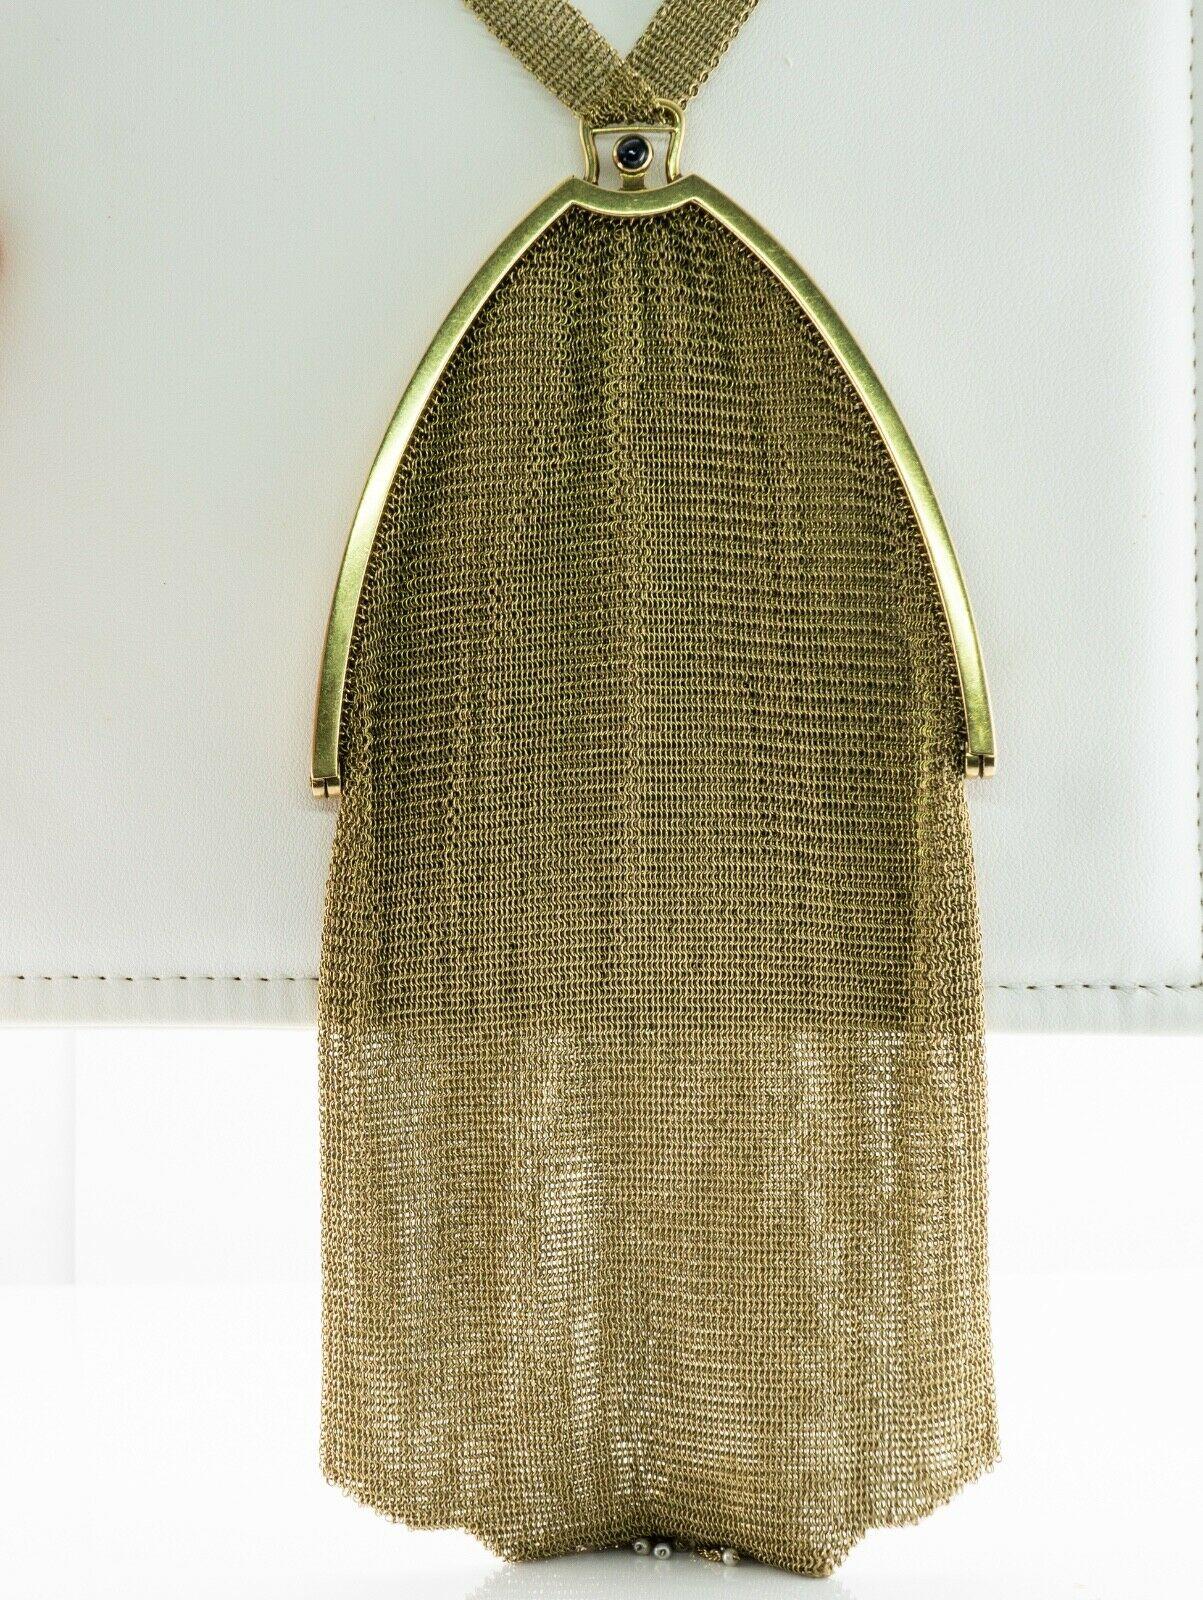 This museum quality authentic Tiffany&Co mesh purse is finely crafted in solid 14K Yellow Gold. 134 grams of solid gold! NO plated or gold filled parts! The mesh purse part measures almost 6.75